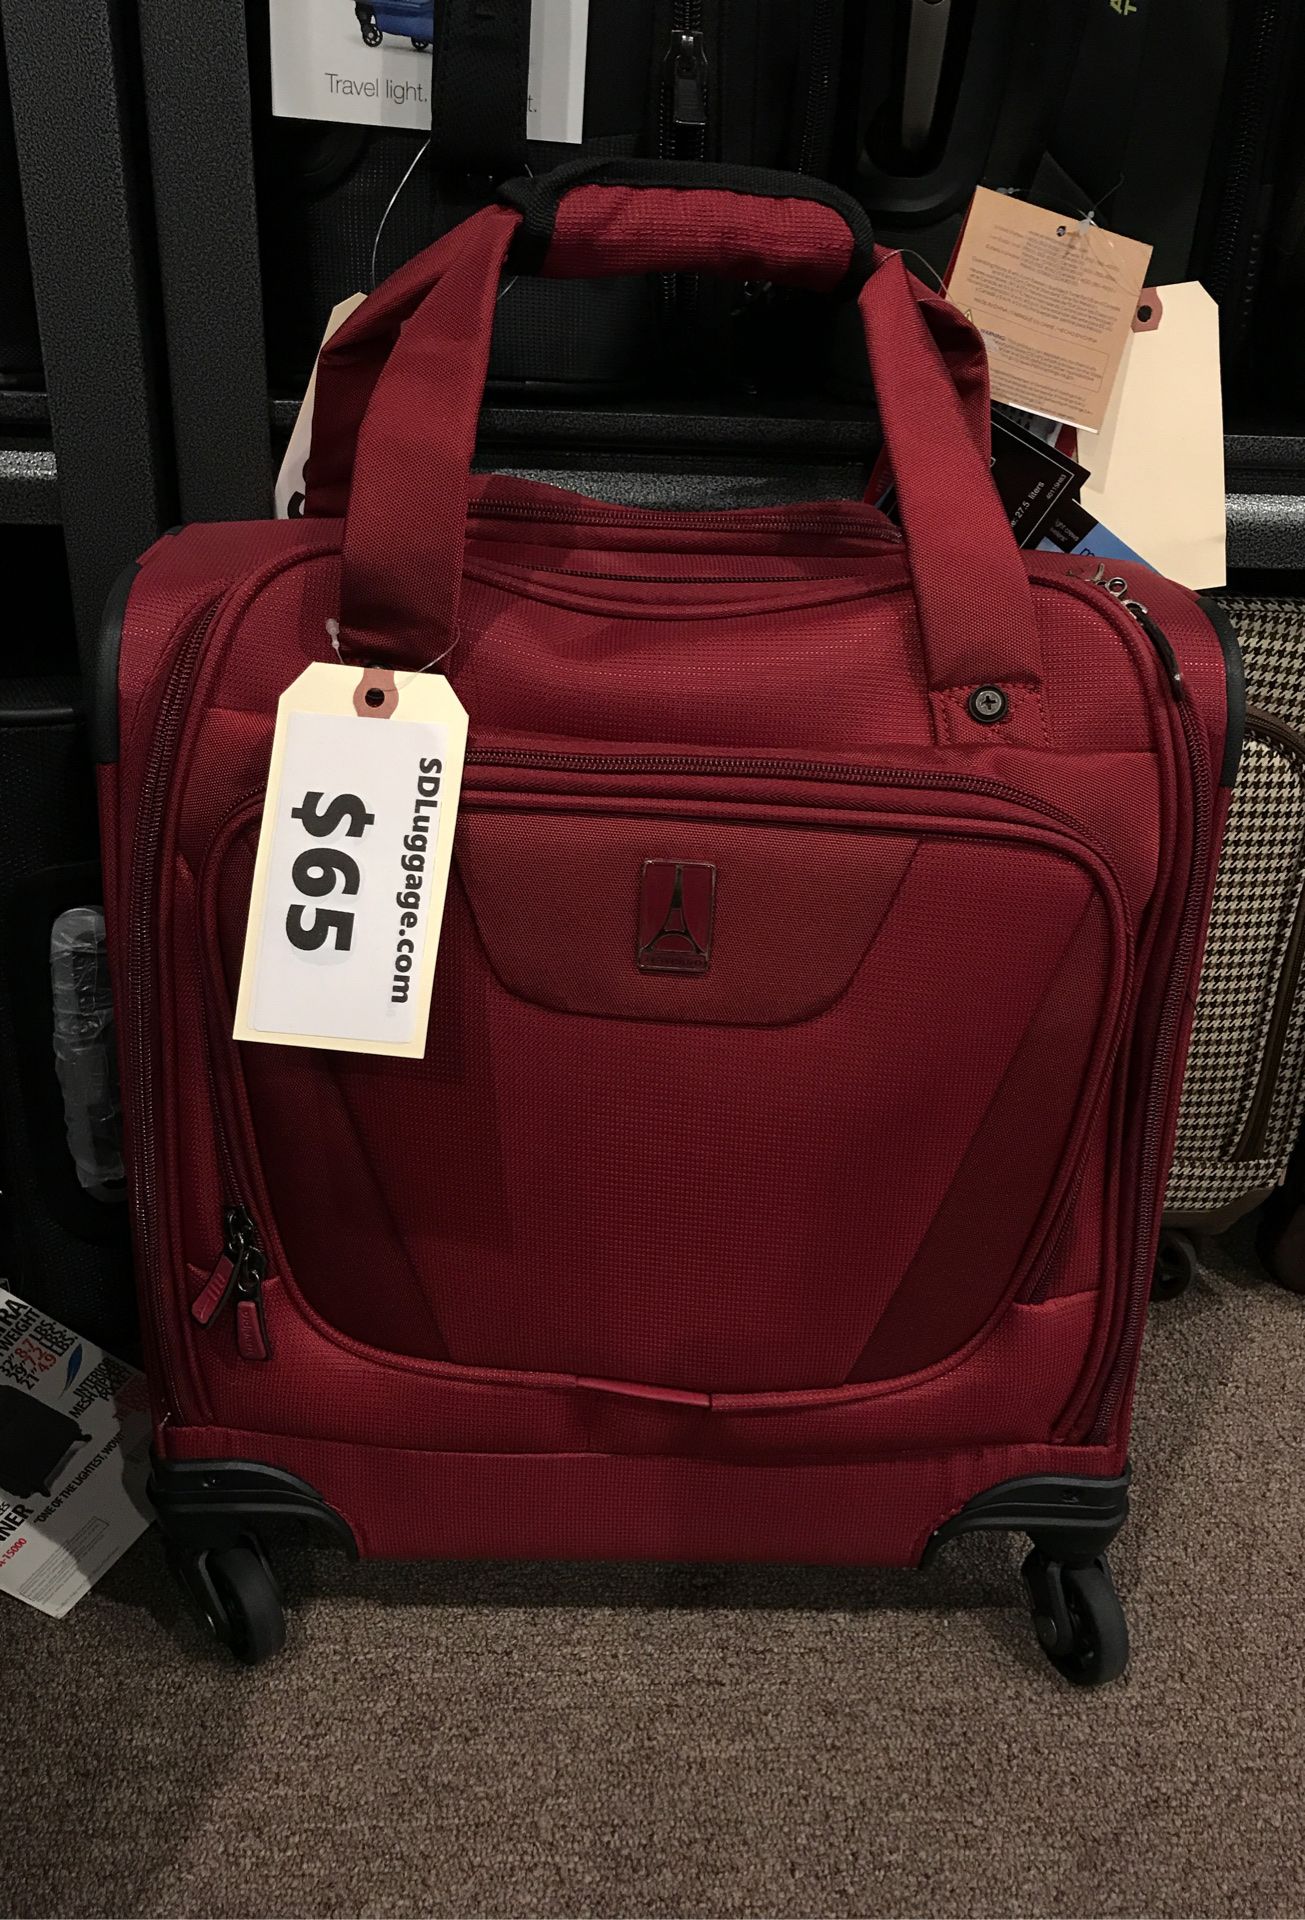 Travelpro maxlite 4 compact hoarding bag red